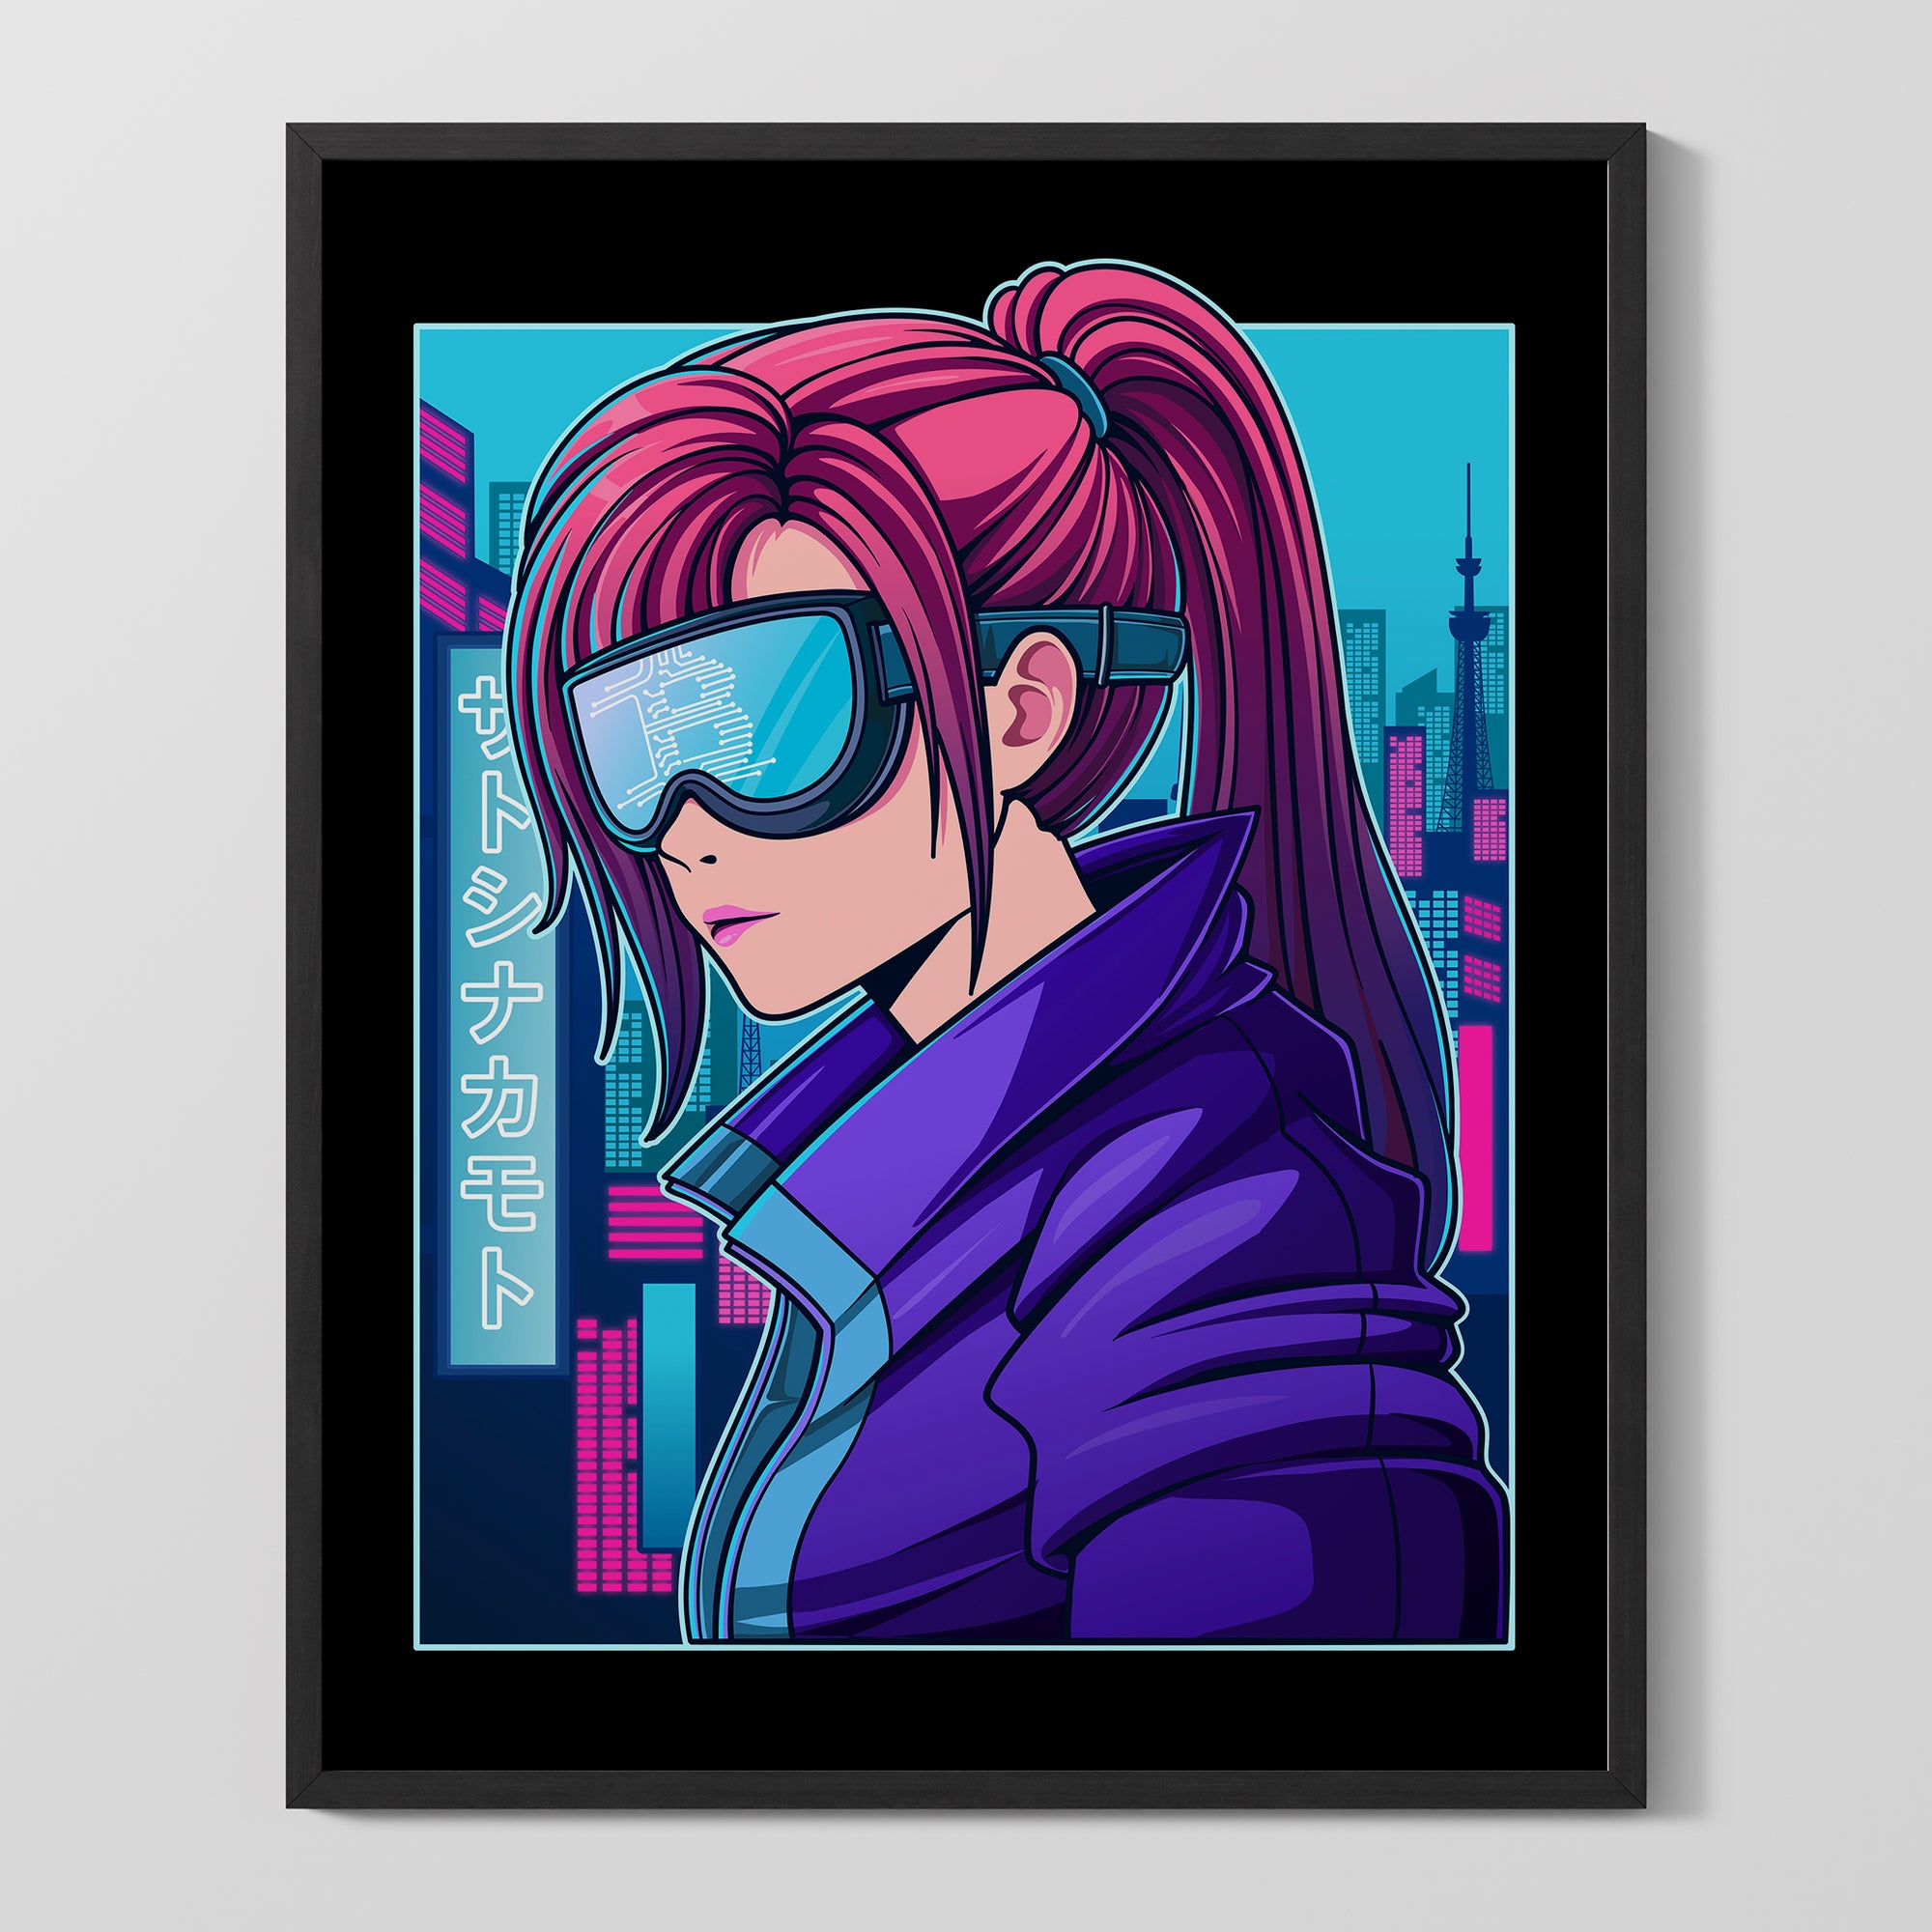 Crypto Art - The Future Is Bitcoin Poster displayed in a frame.